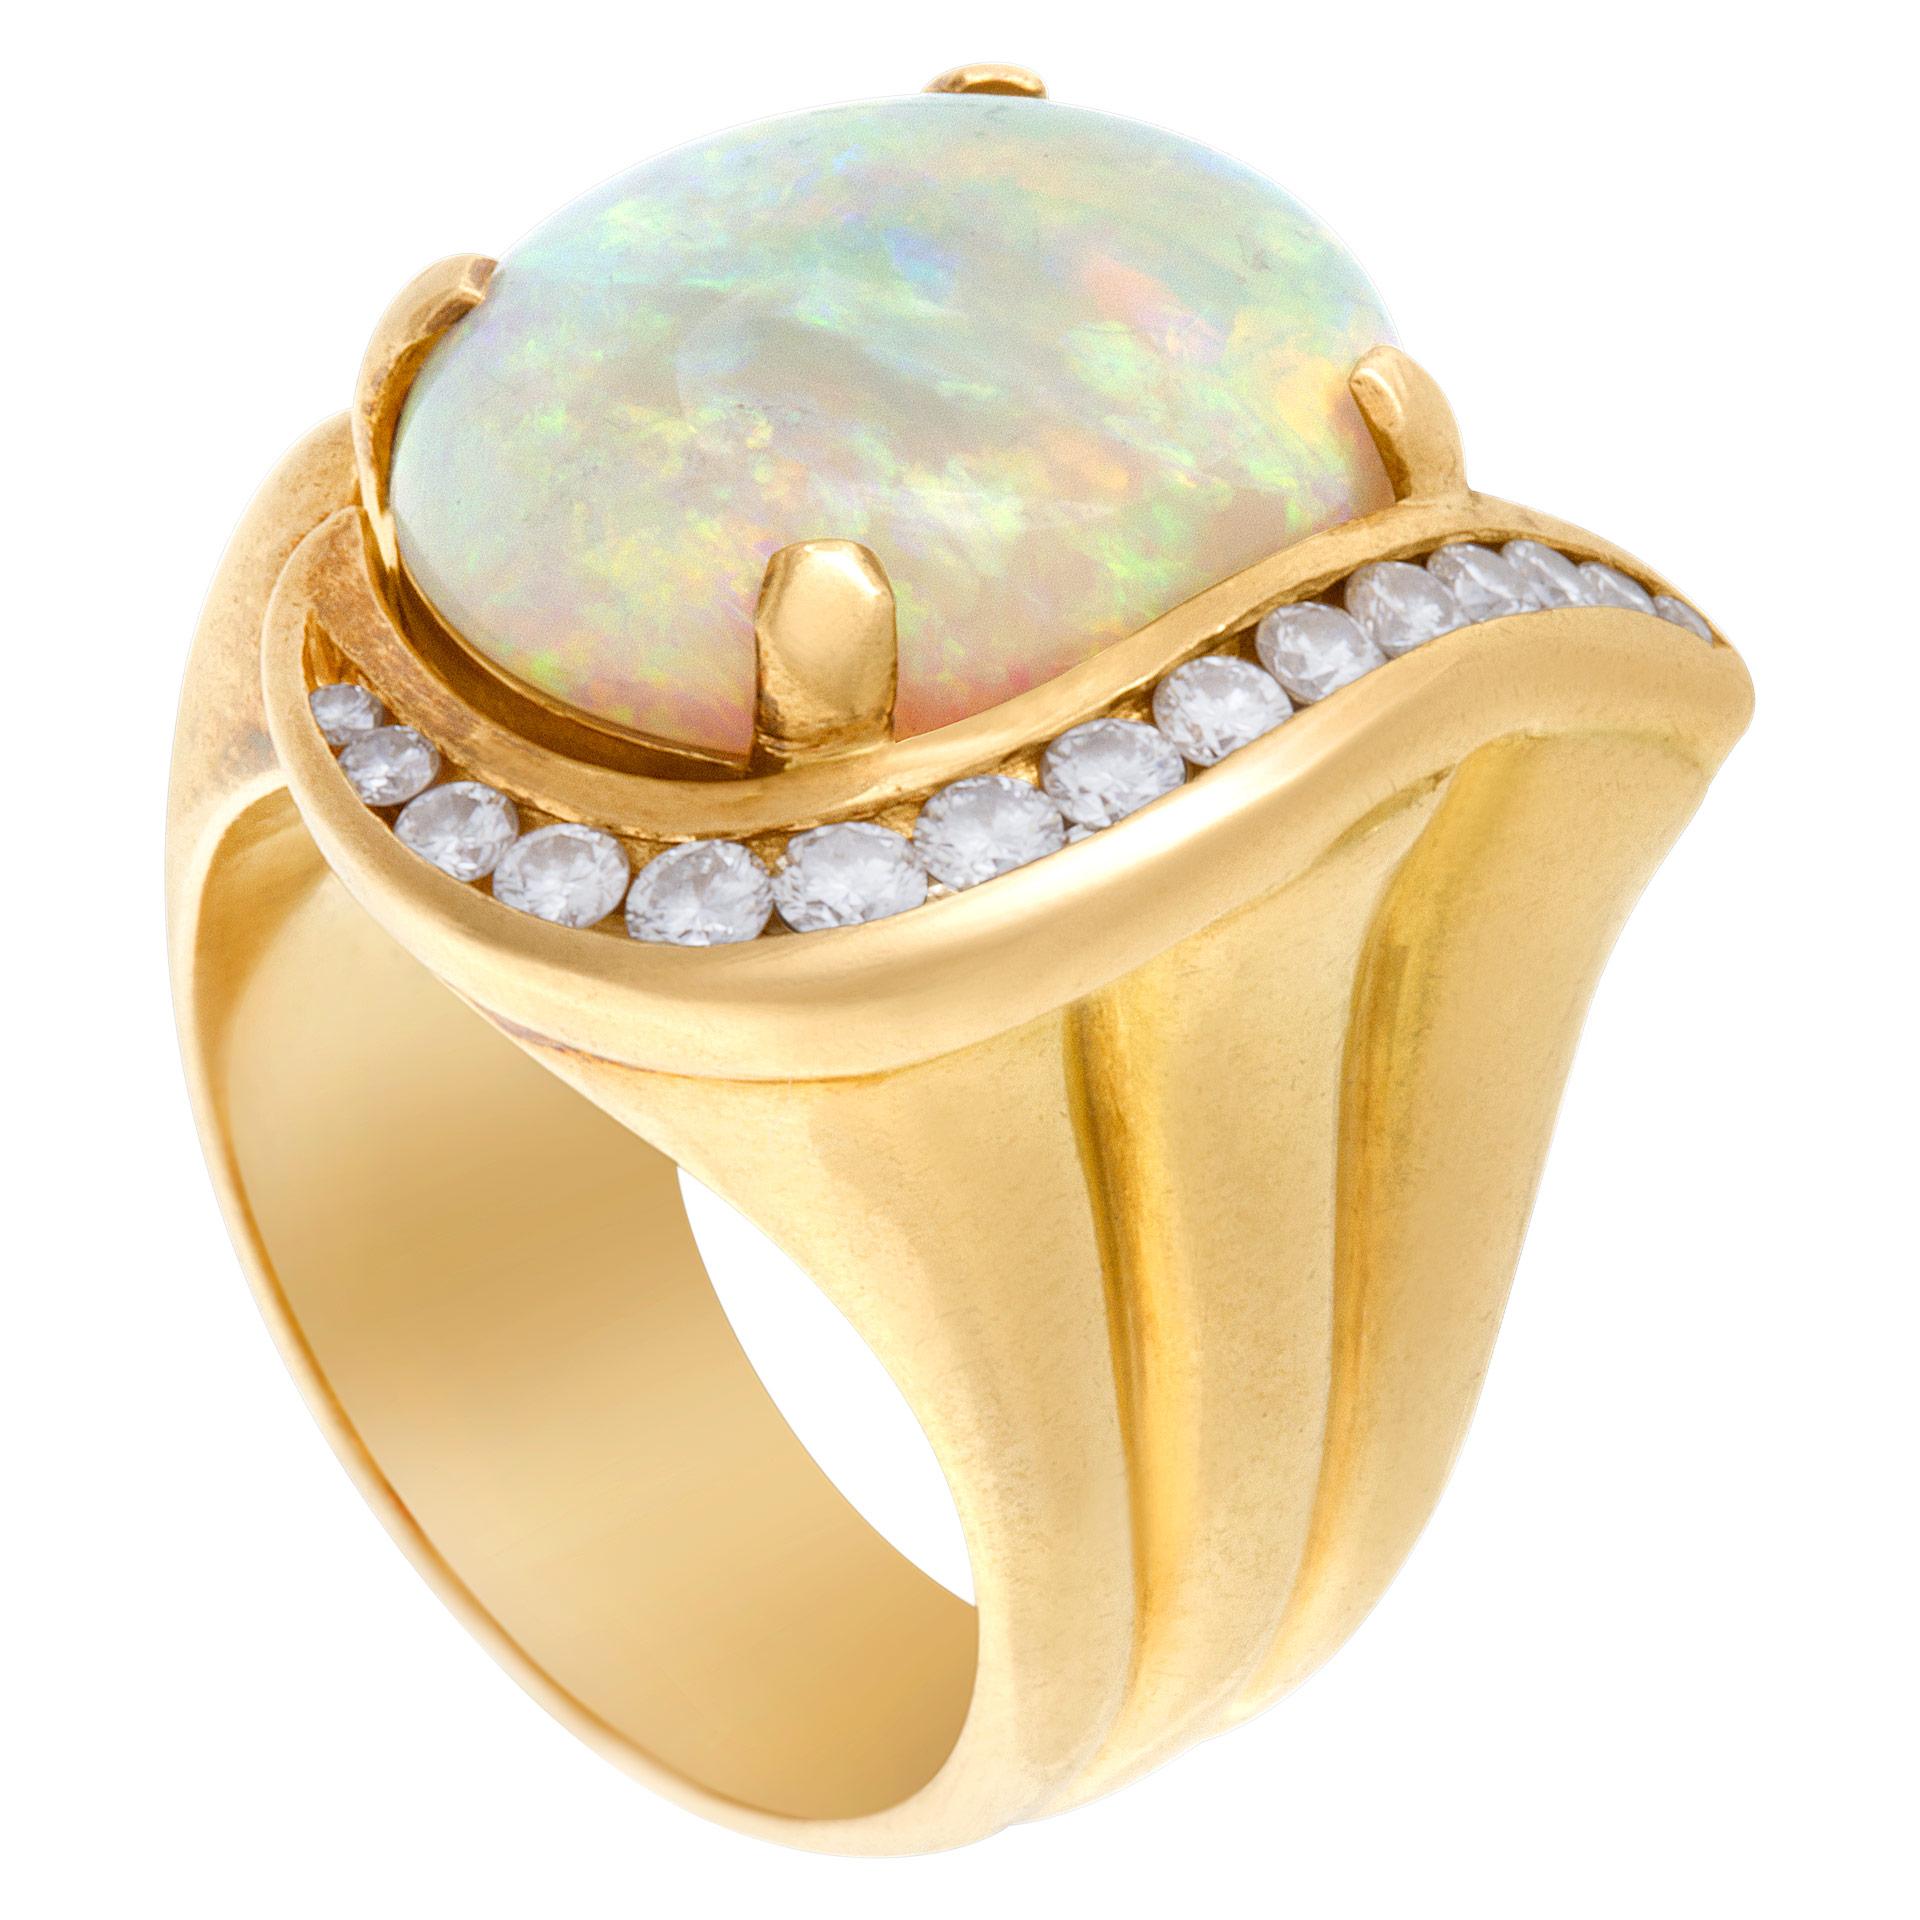 Australian opal and Diamond ring in 18k (0.50ct in diamond accents) Width- 19.5mm, Size: 6.75.  This Diamond ring is currently size 6.75 and some items can be sized up or down, please ask! It weighs 11.6 pennyweights and is 18k Yellow Gold.
